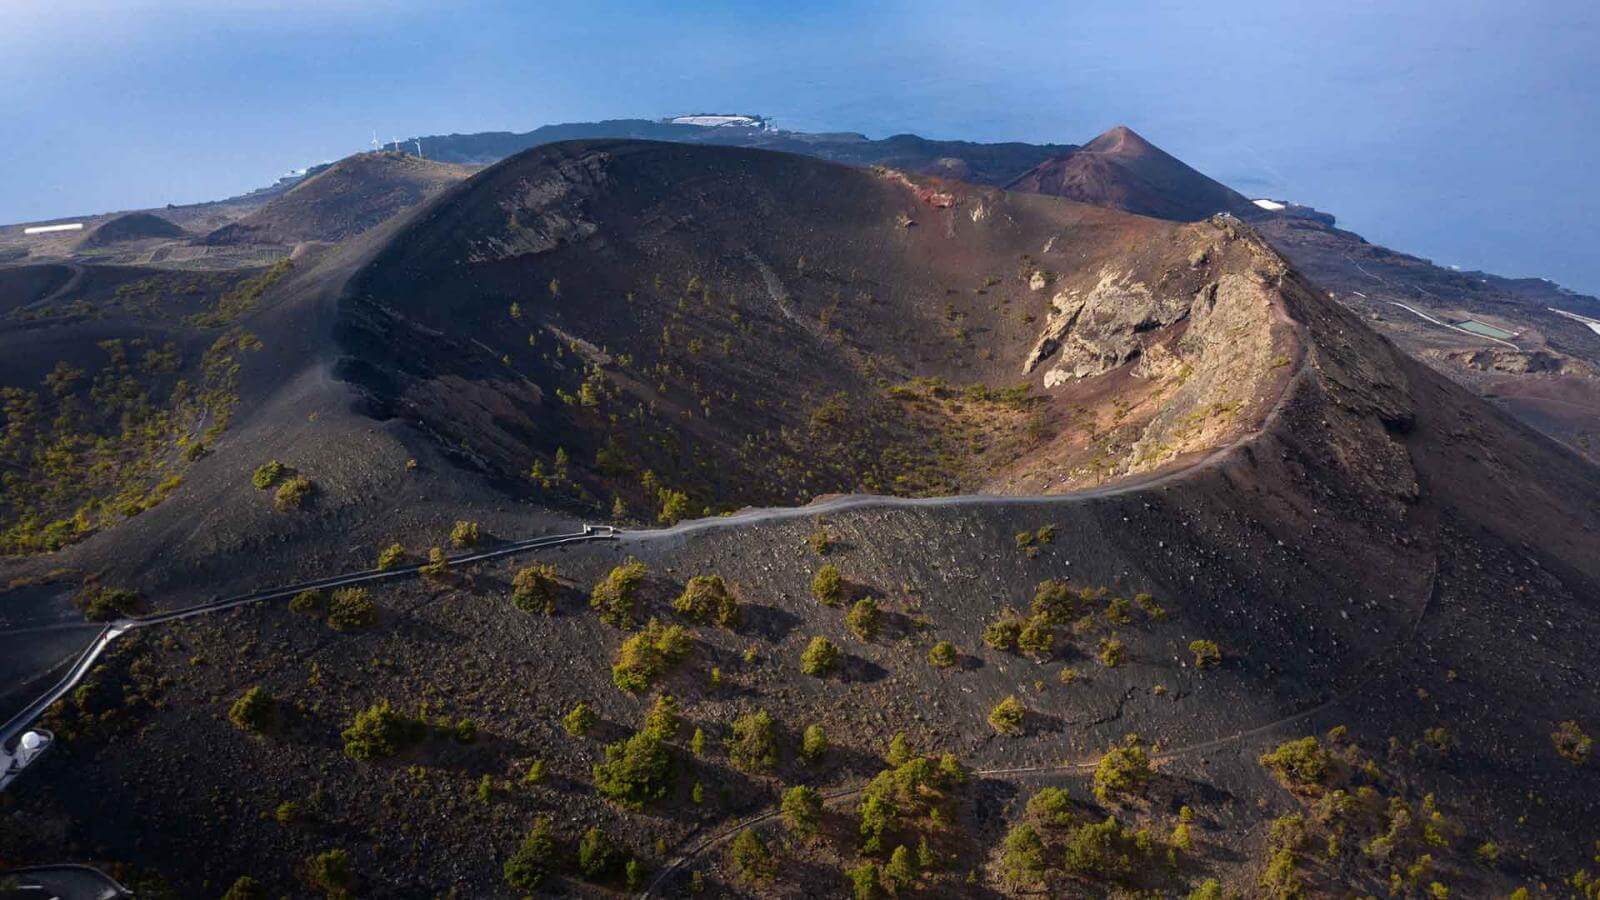 The Canary Islands will receive 3 million euros in European funds for a project to promote geothermal energy in the Macaronesia.